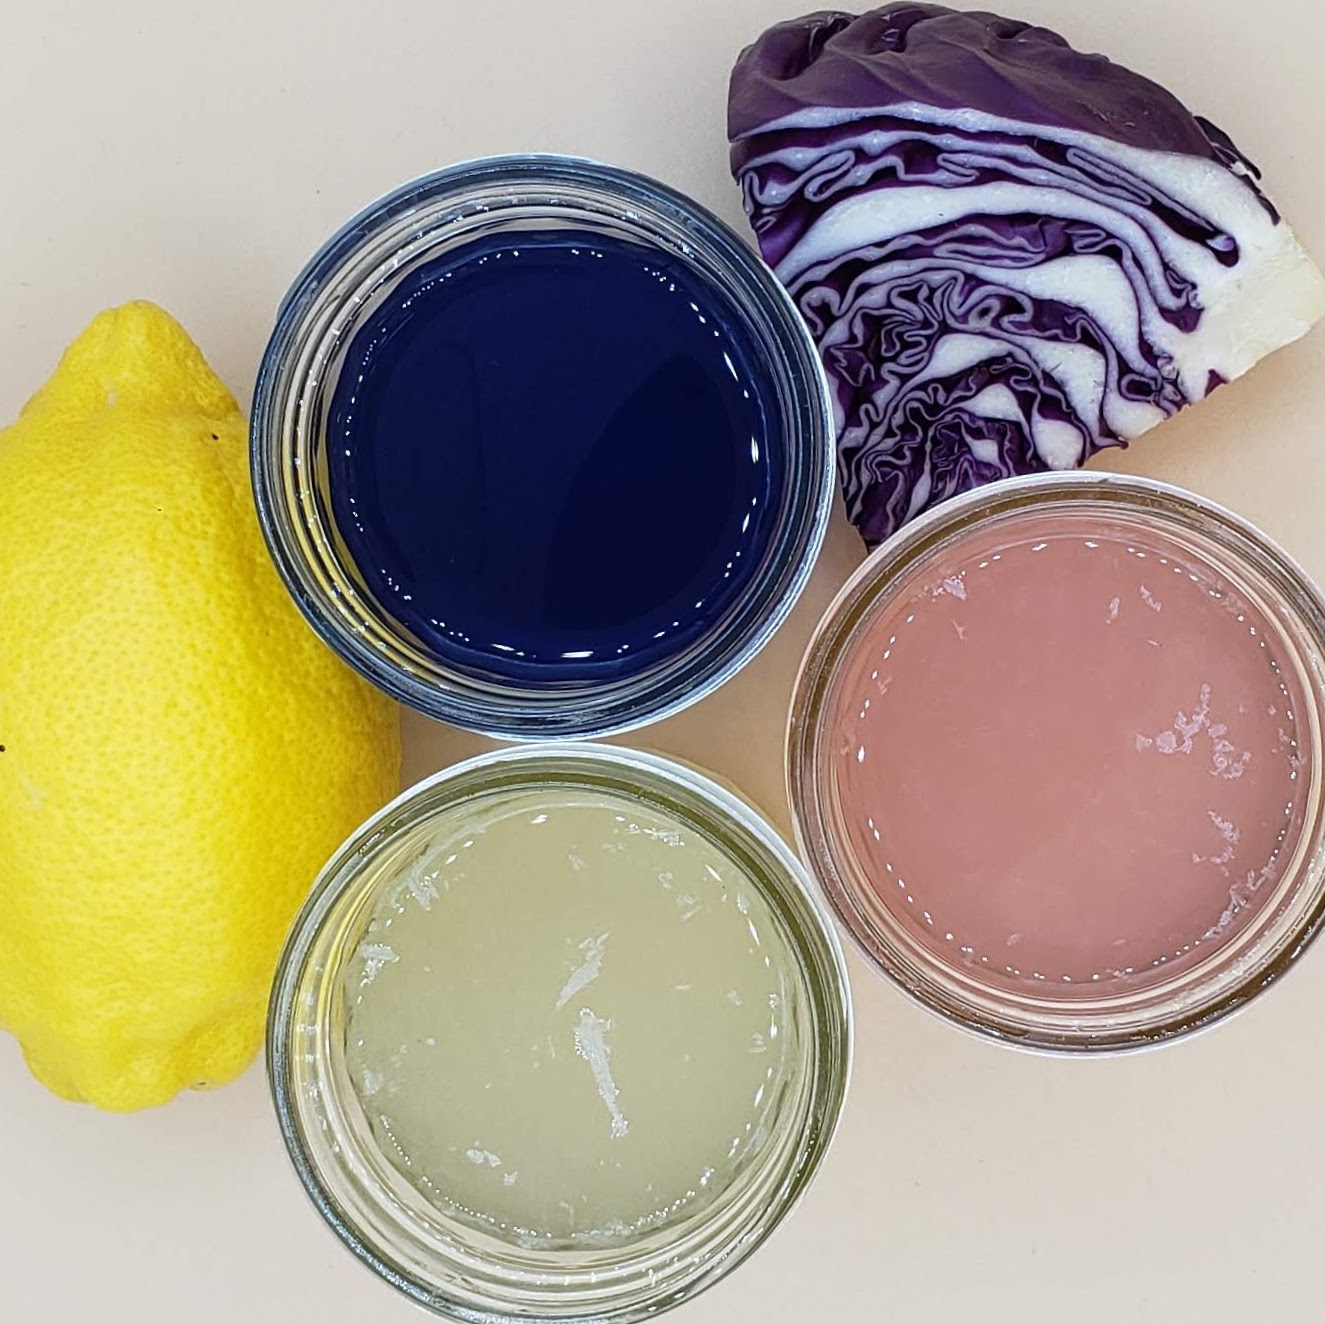 Use a pH indicator from purple cabbage to make a tasty, pink treat.